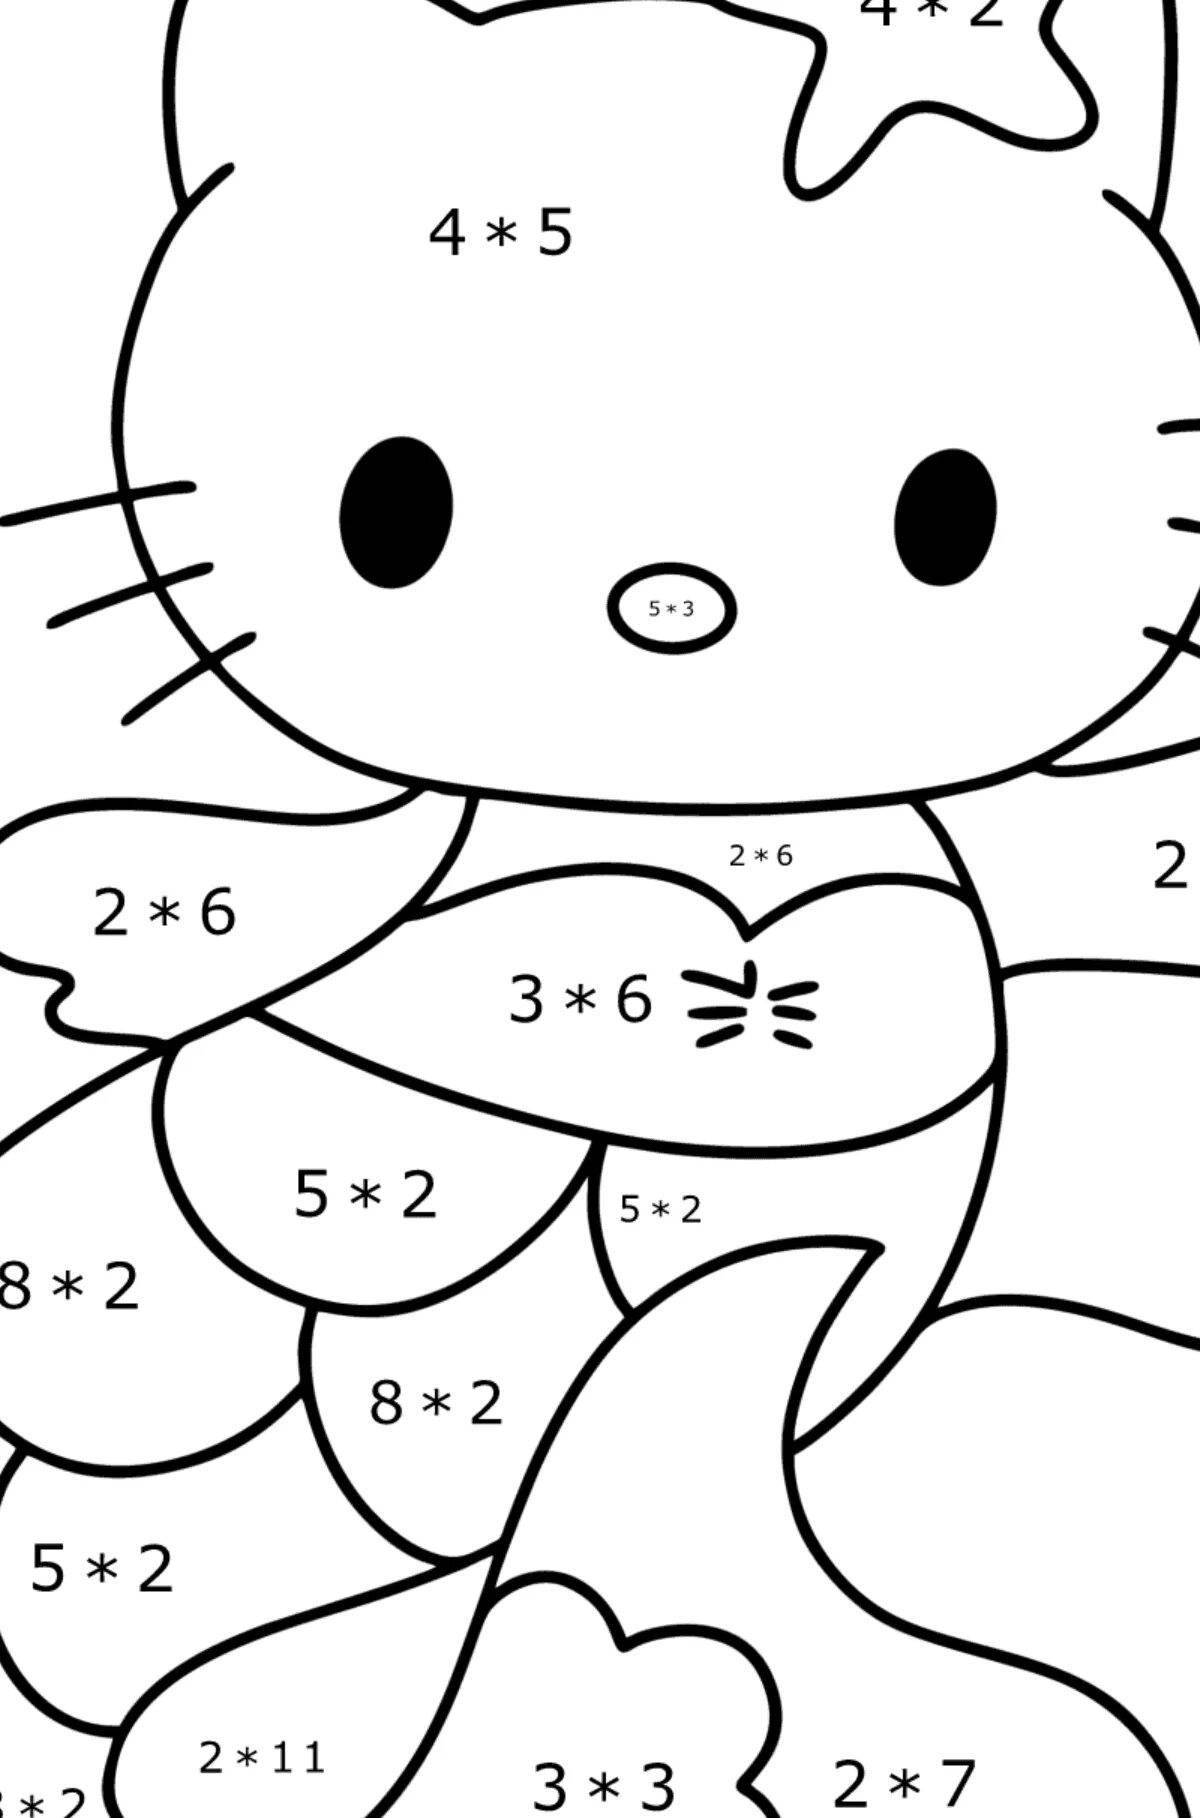 Awesome hello kitty mermaid coloring page